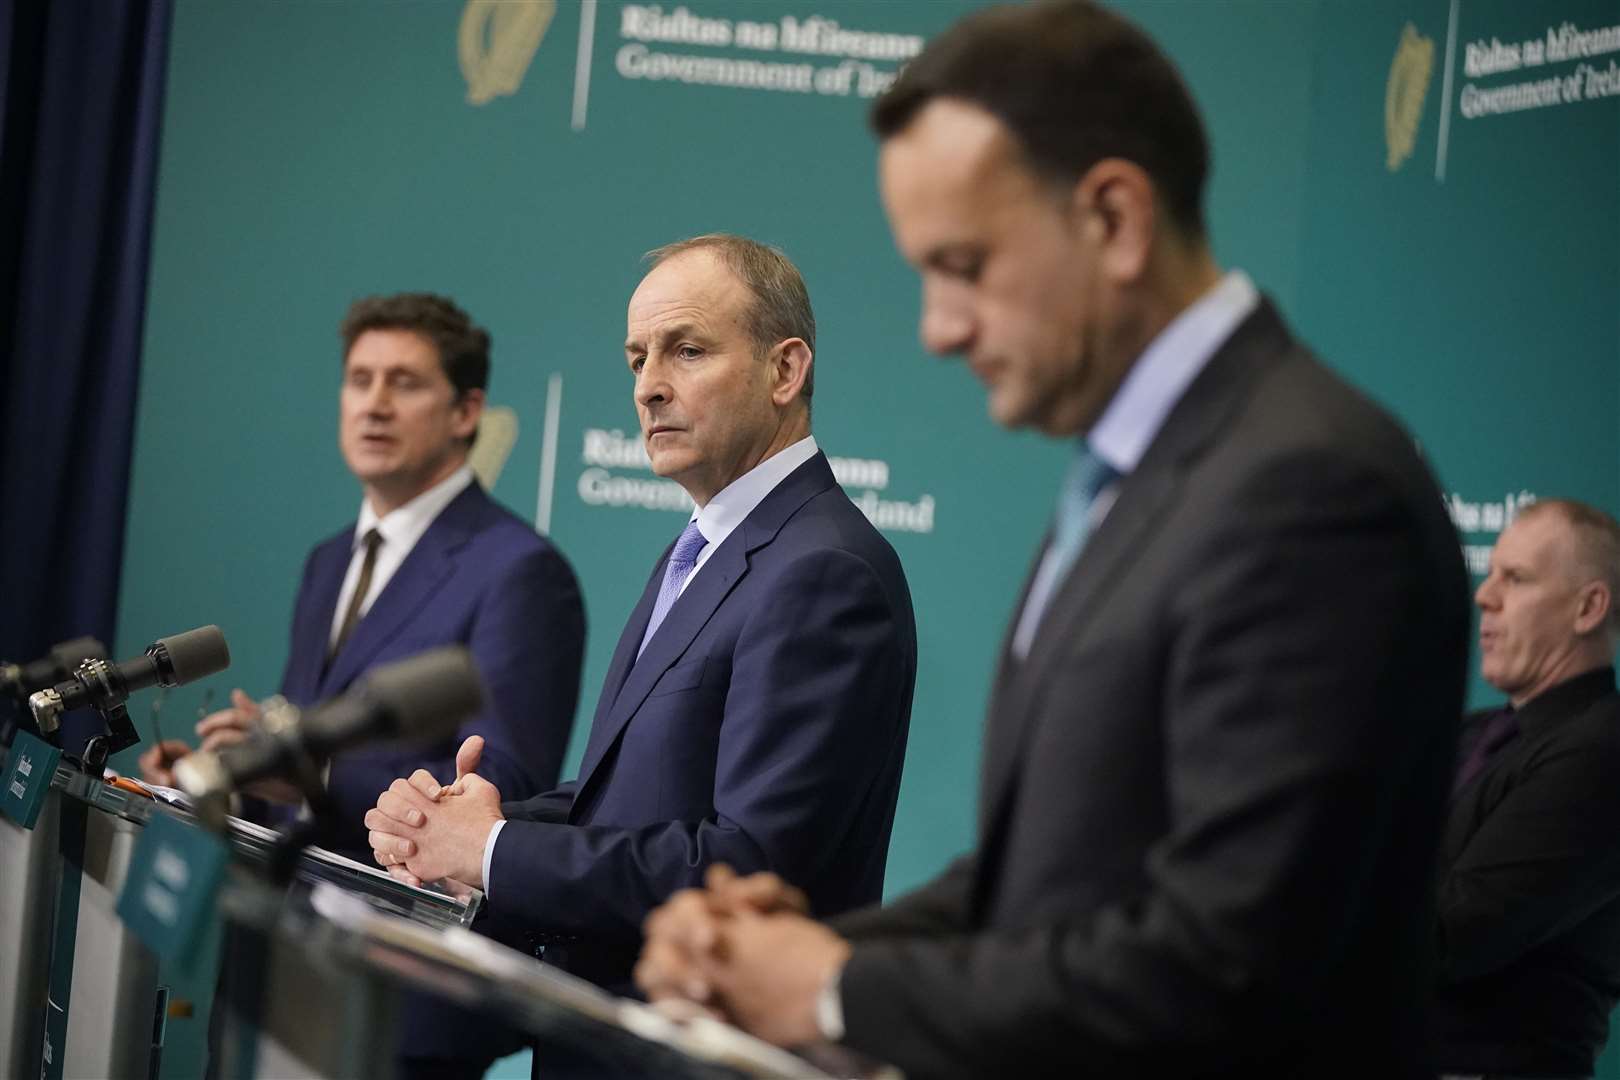 Green Party leader Eamon Ryan, Micheal Martin and Leo Varadkar agreed to enter coalition government together in 2020 (Niall Carson/PA)